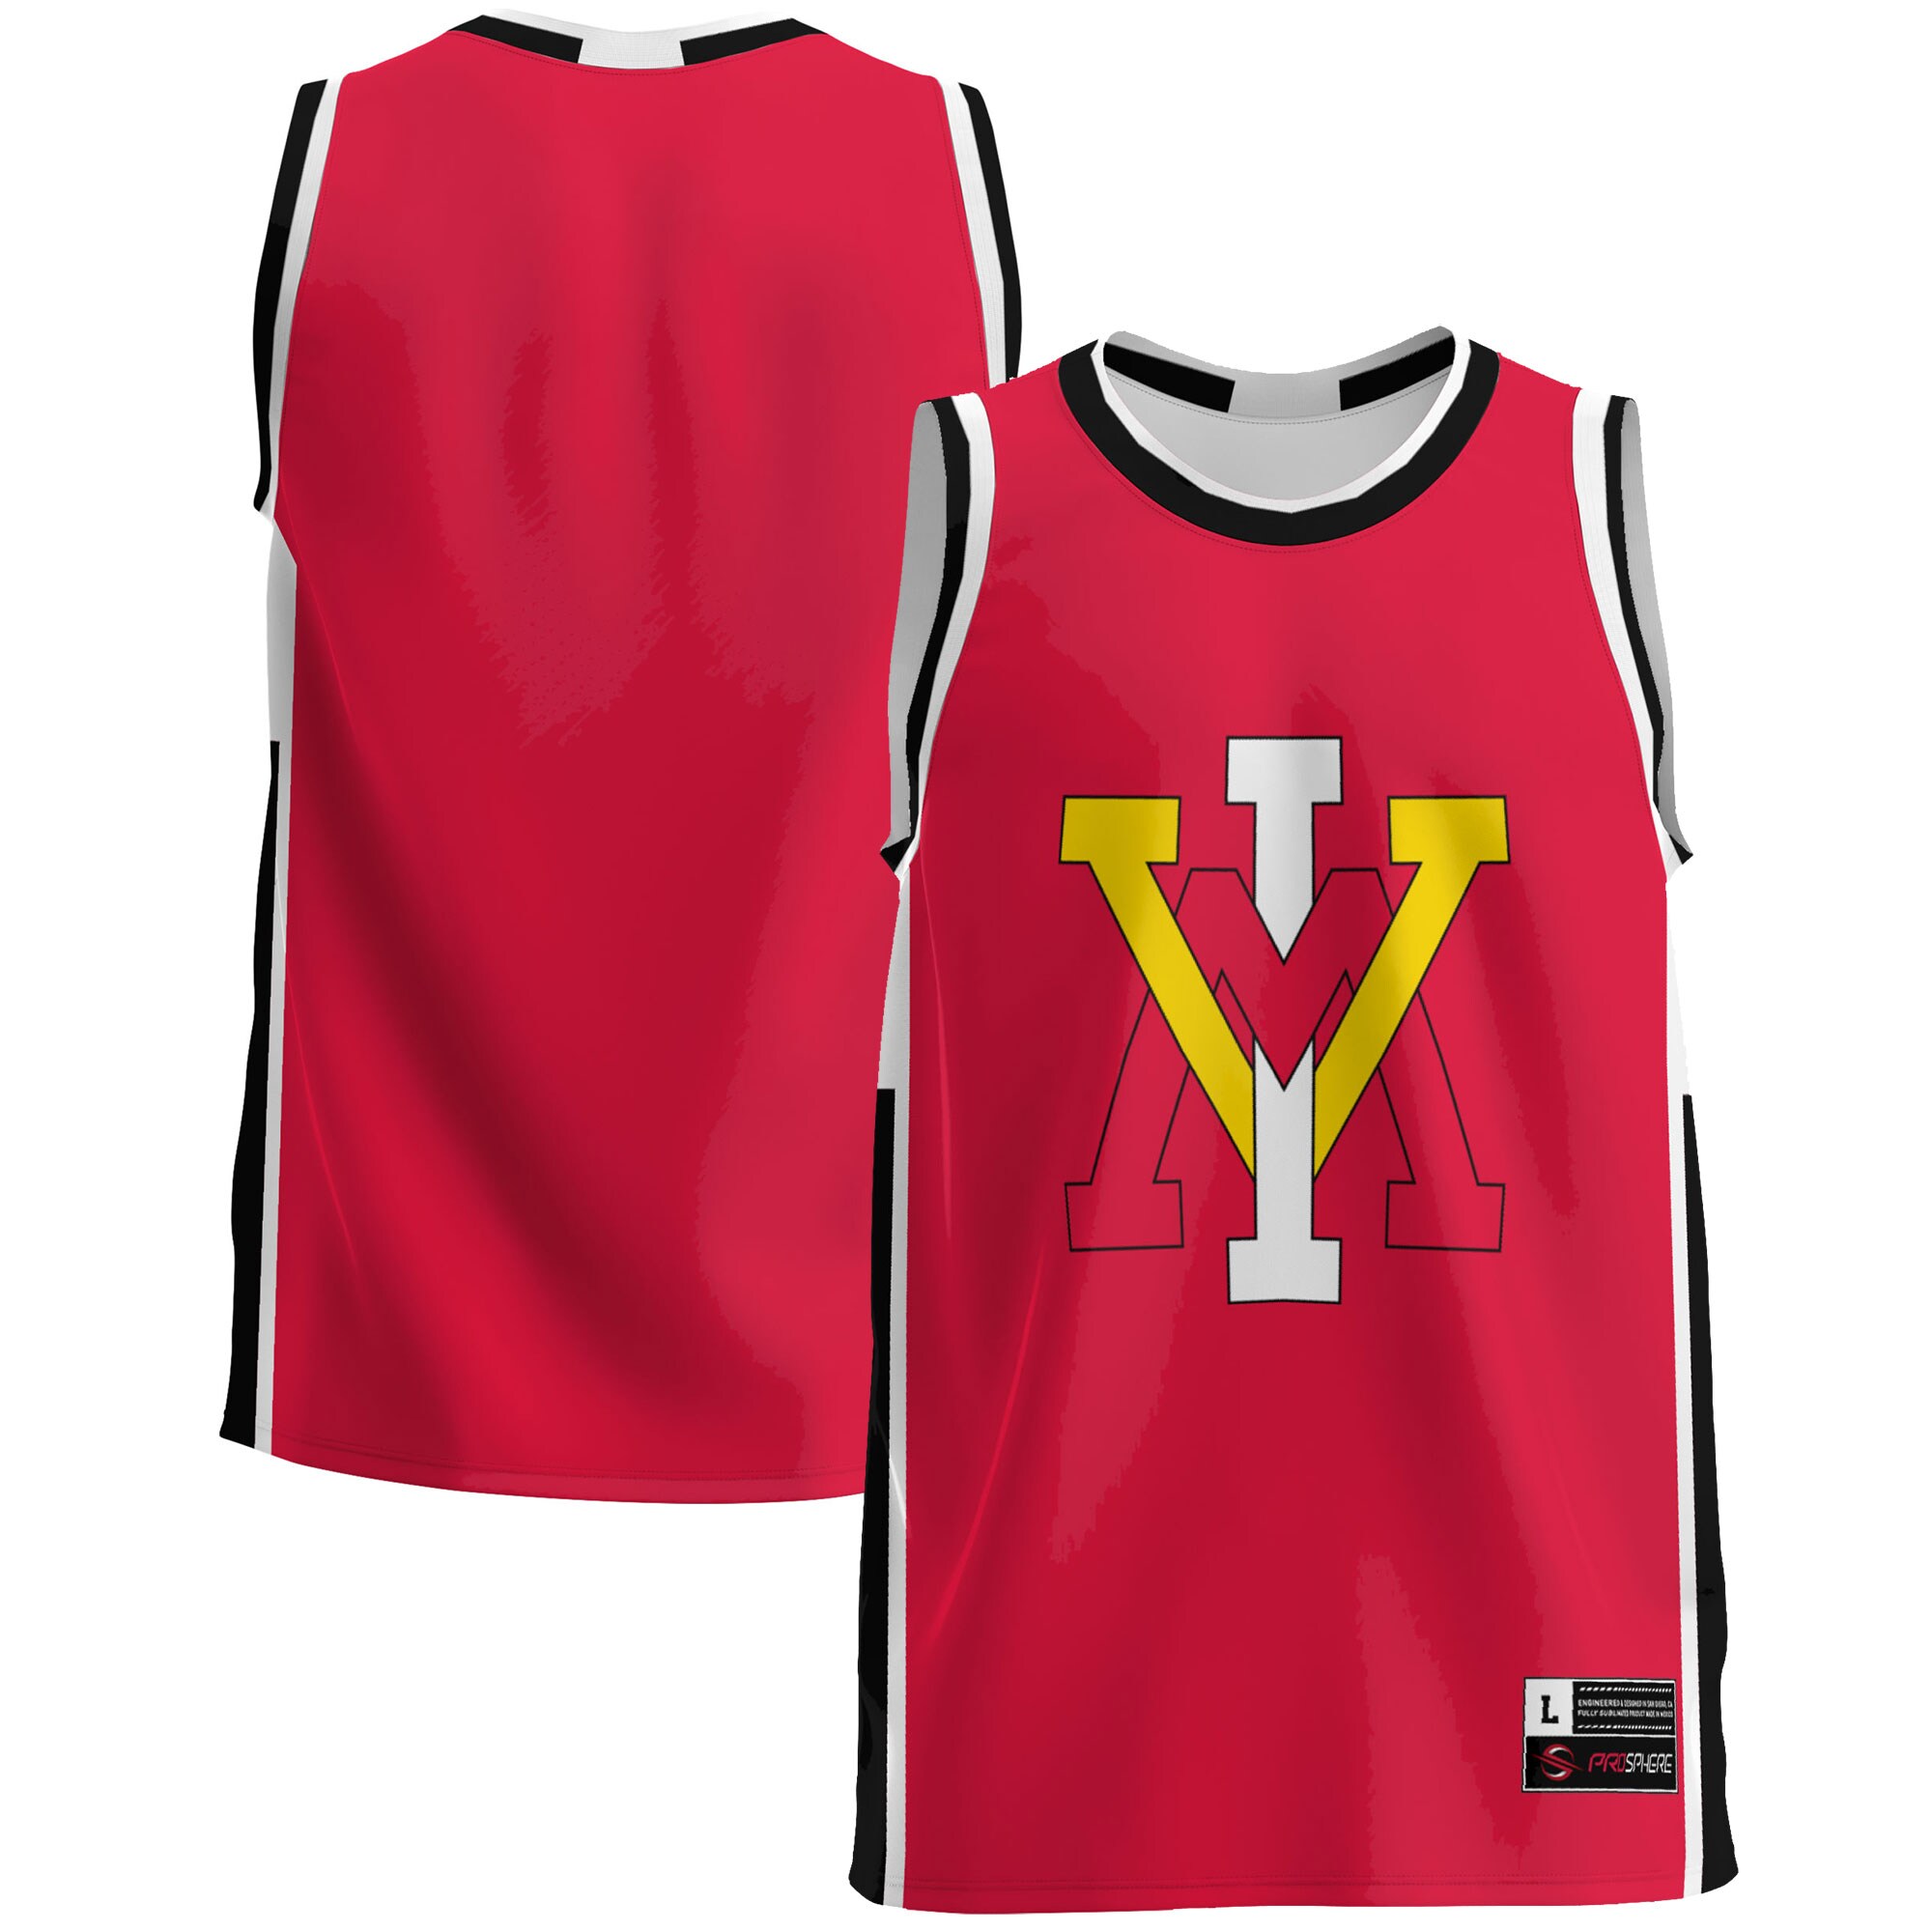 Virginia Military Institute Keydets Basketball Jersey - Red For Youth Women Men